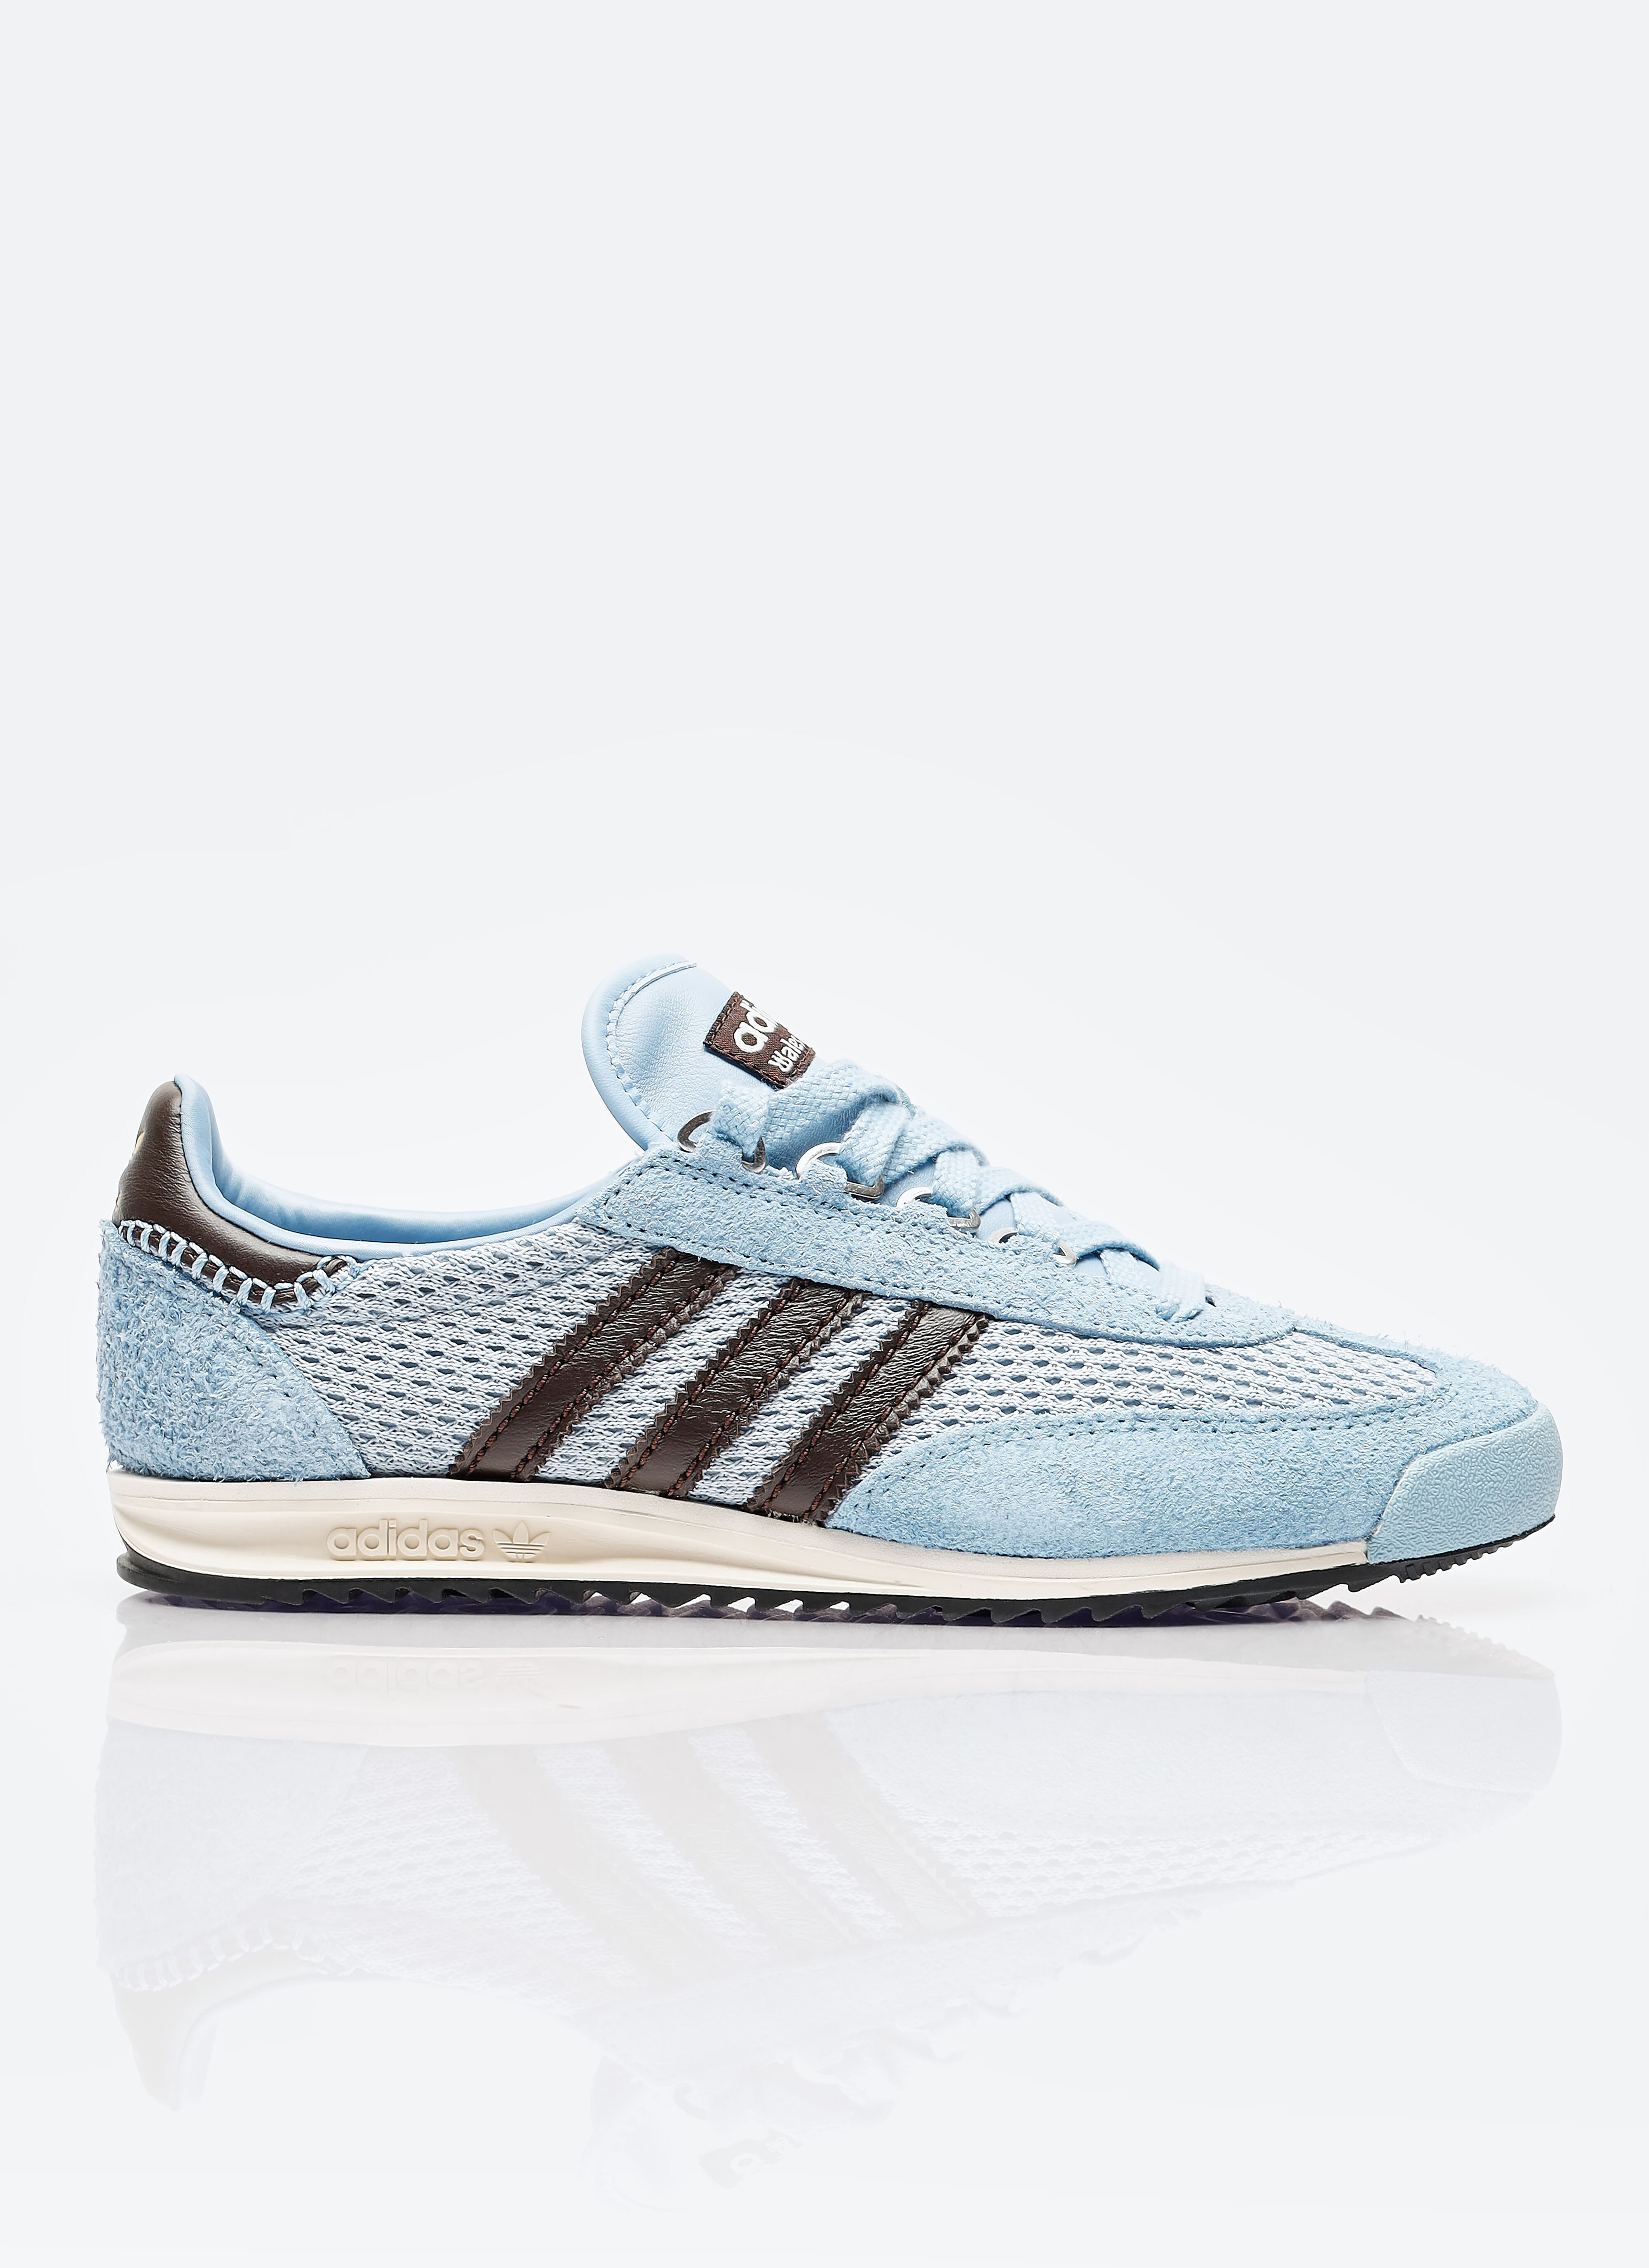 adidas by Wales Bonner SL76 Sneakers Green awb0357013